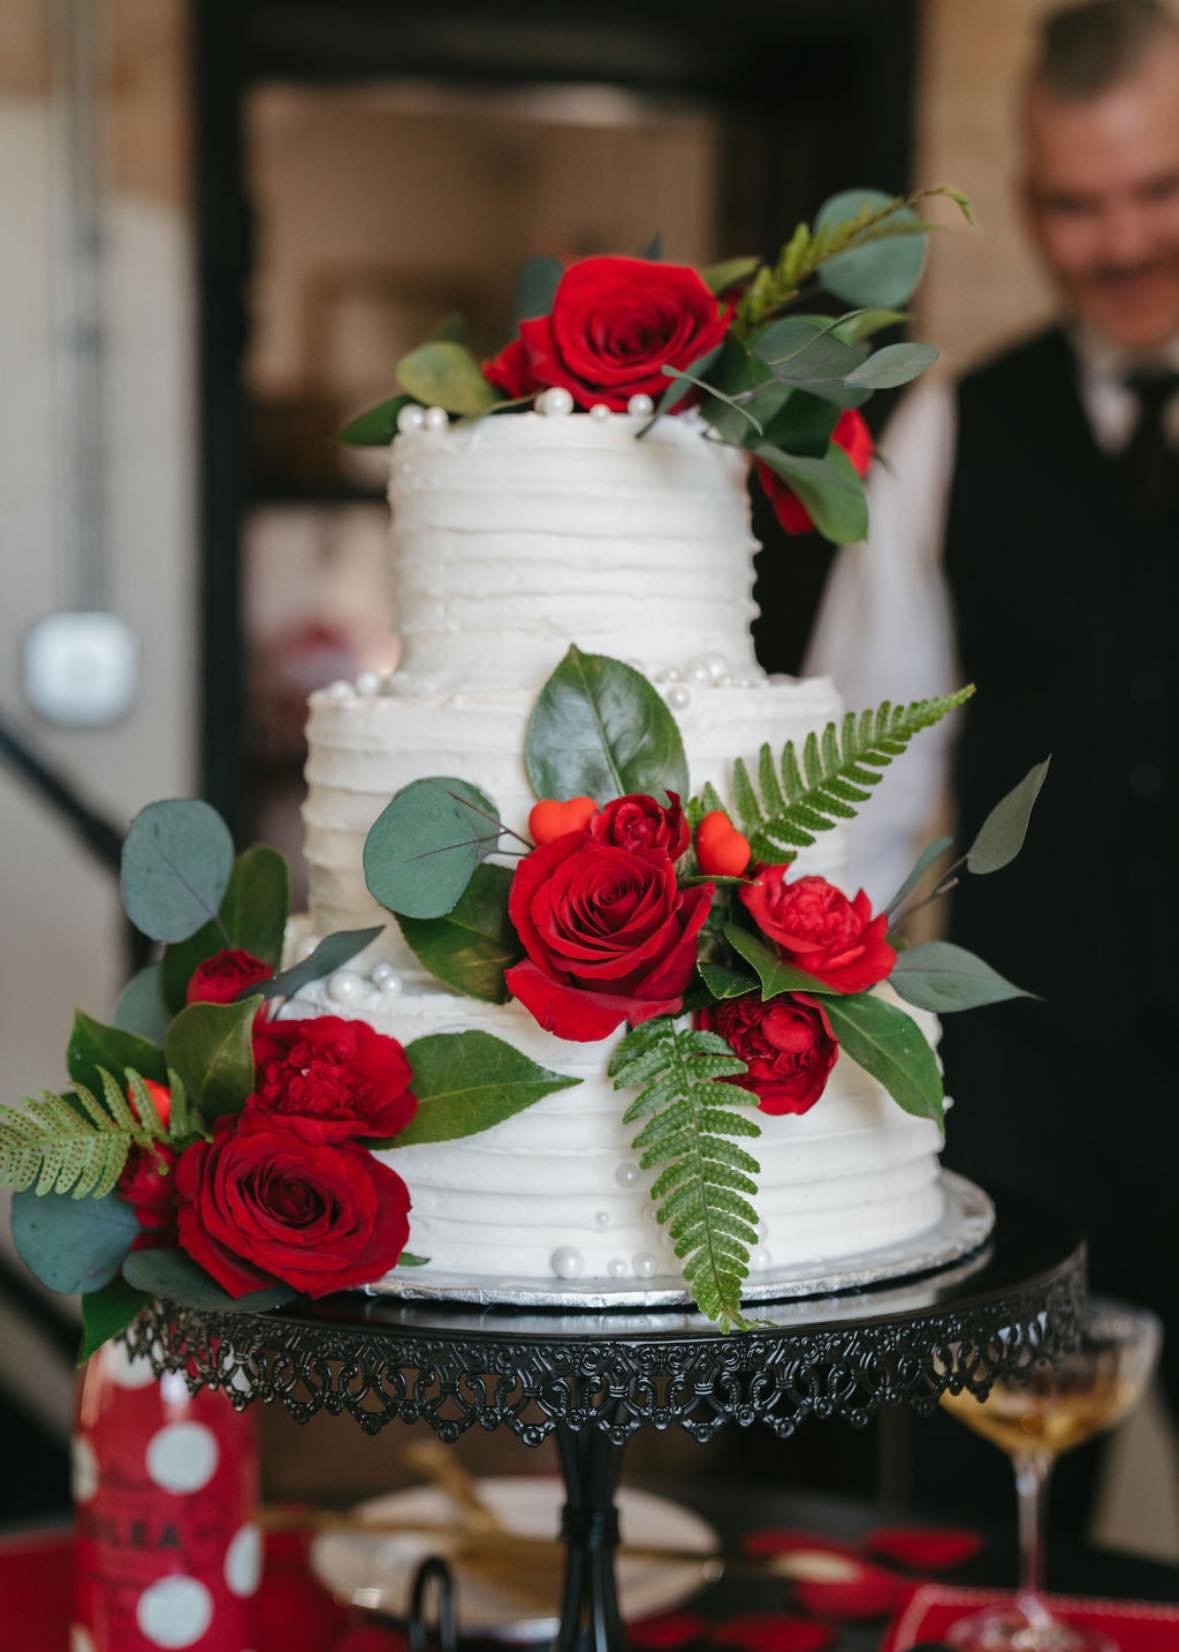 The Historic Dallas Jail Real Wedding Shayne and Katie 3 Tiered Wedding cake with roses.jpg